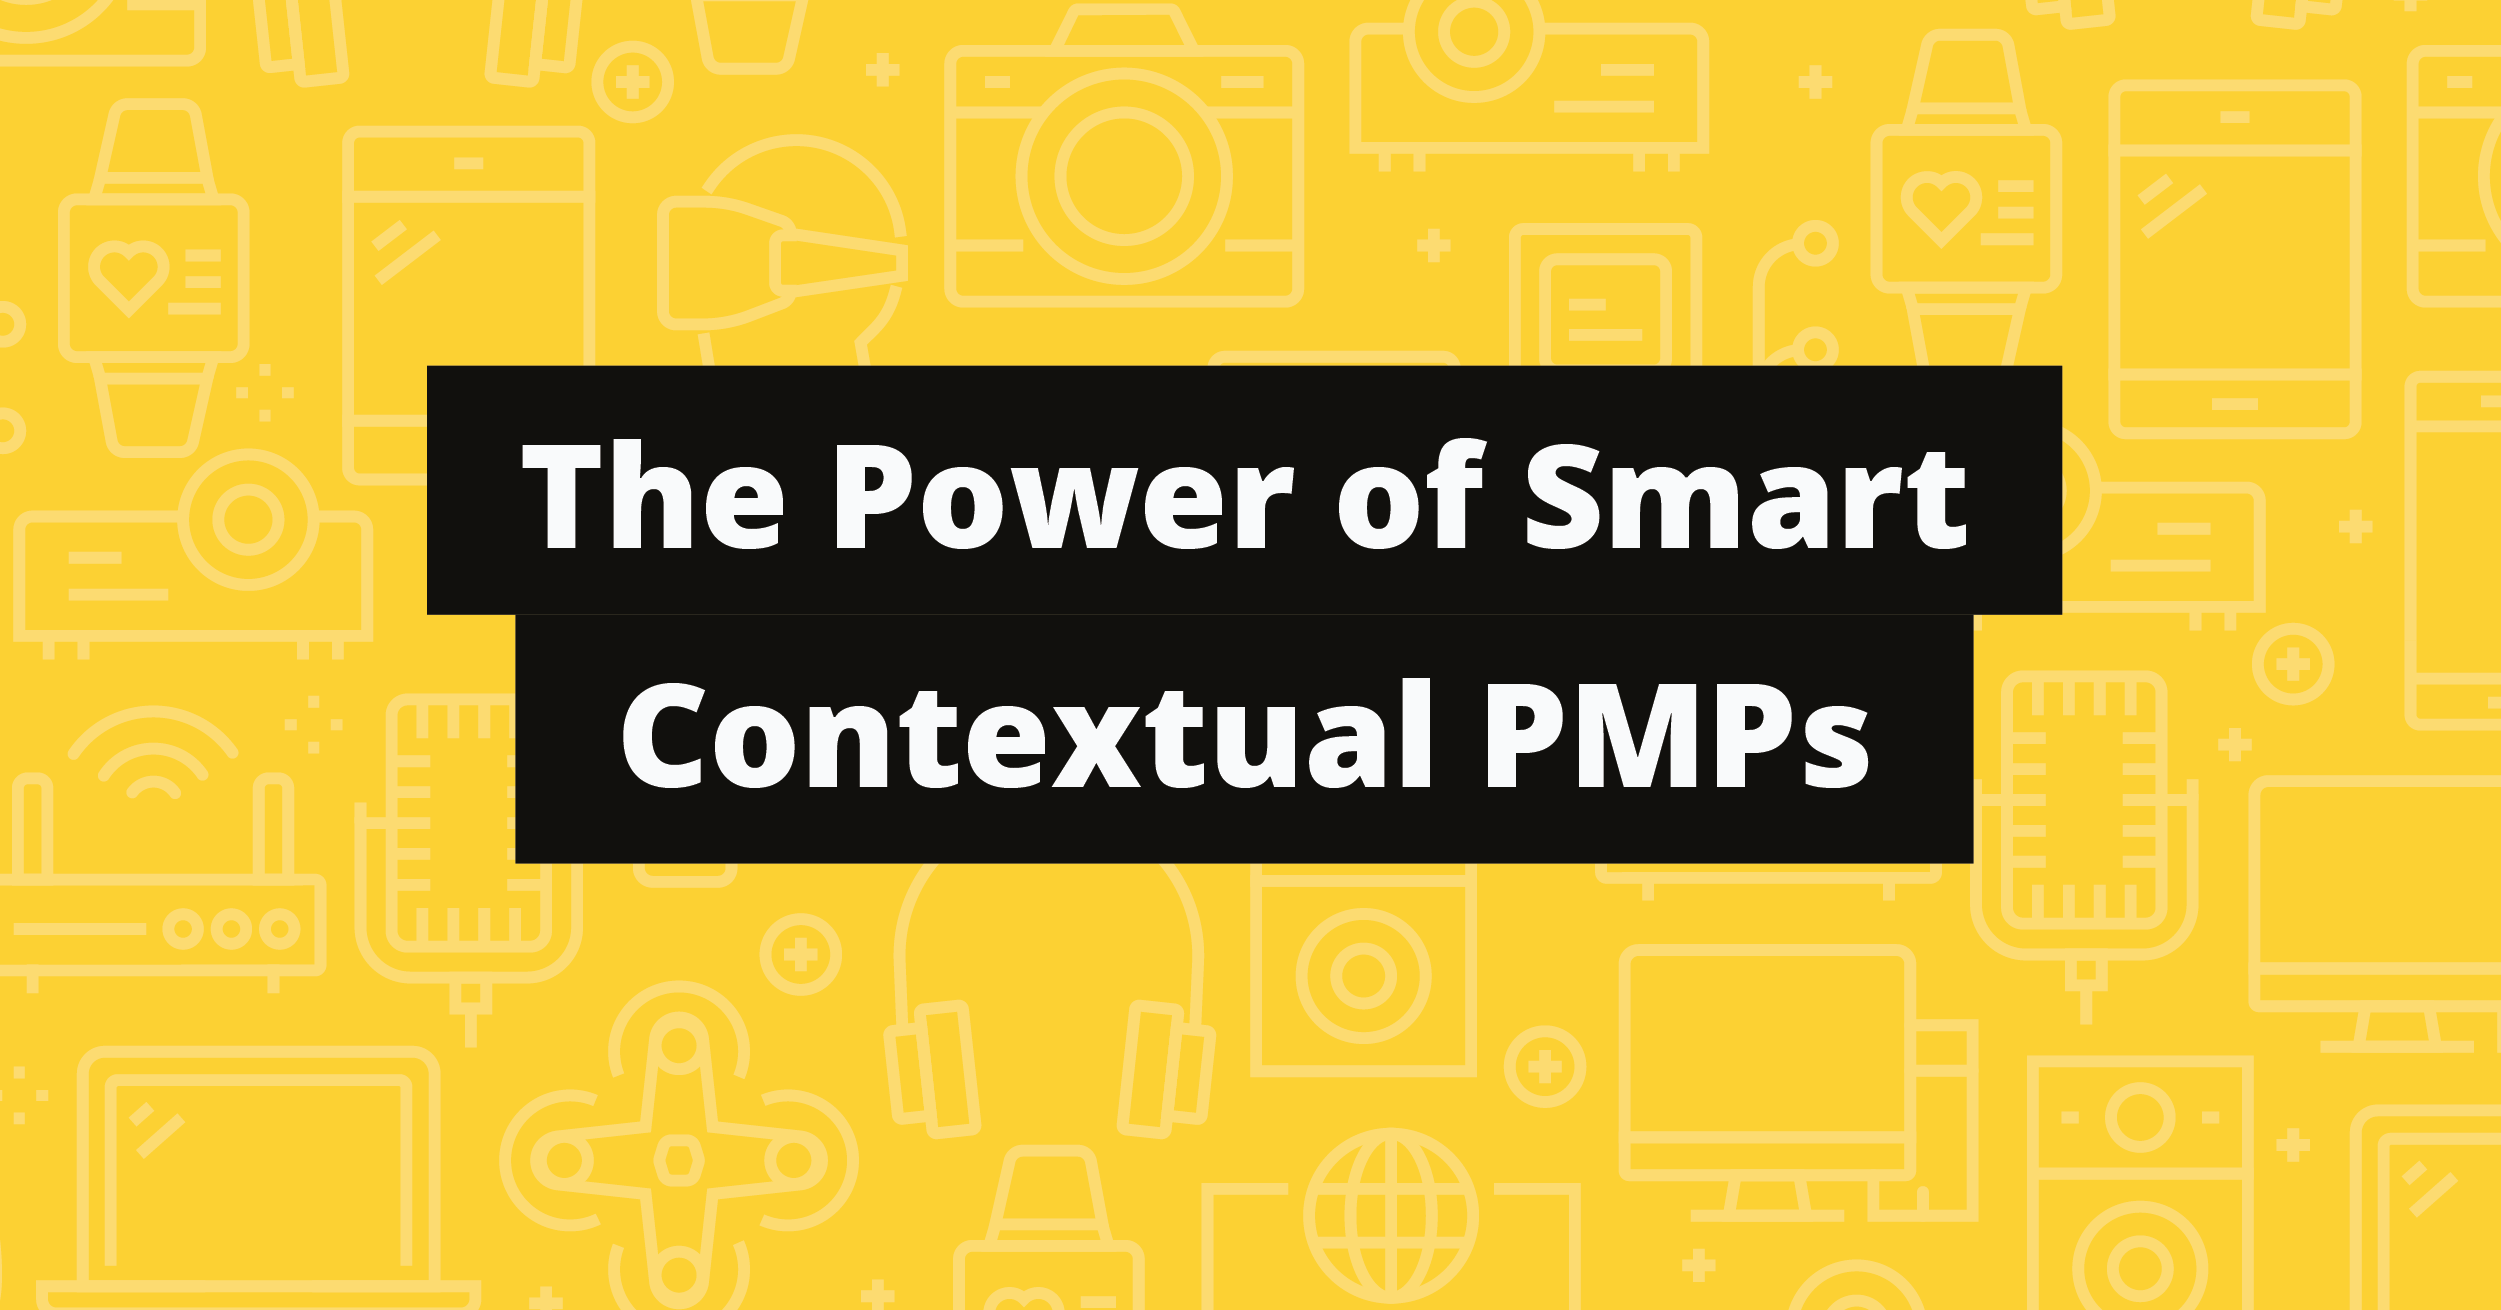 Are you Leveraging the Power of Smart Contextual PMP’s?